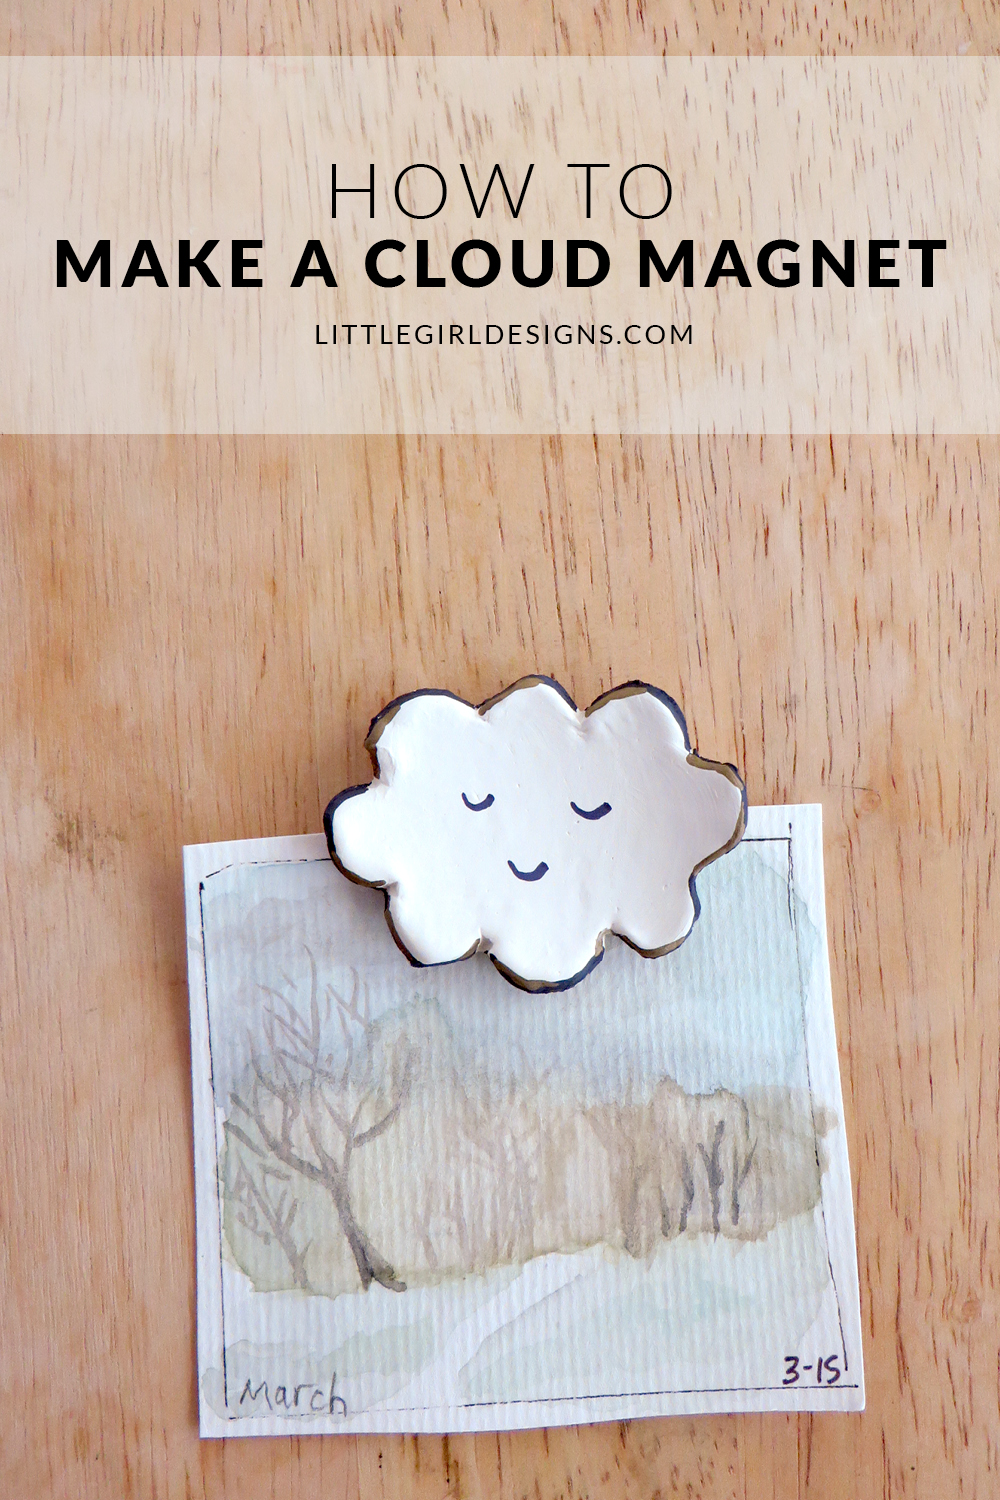 How to Make a Cloud Magnet